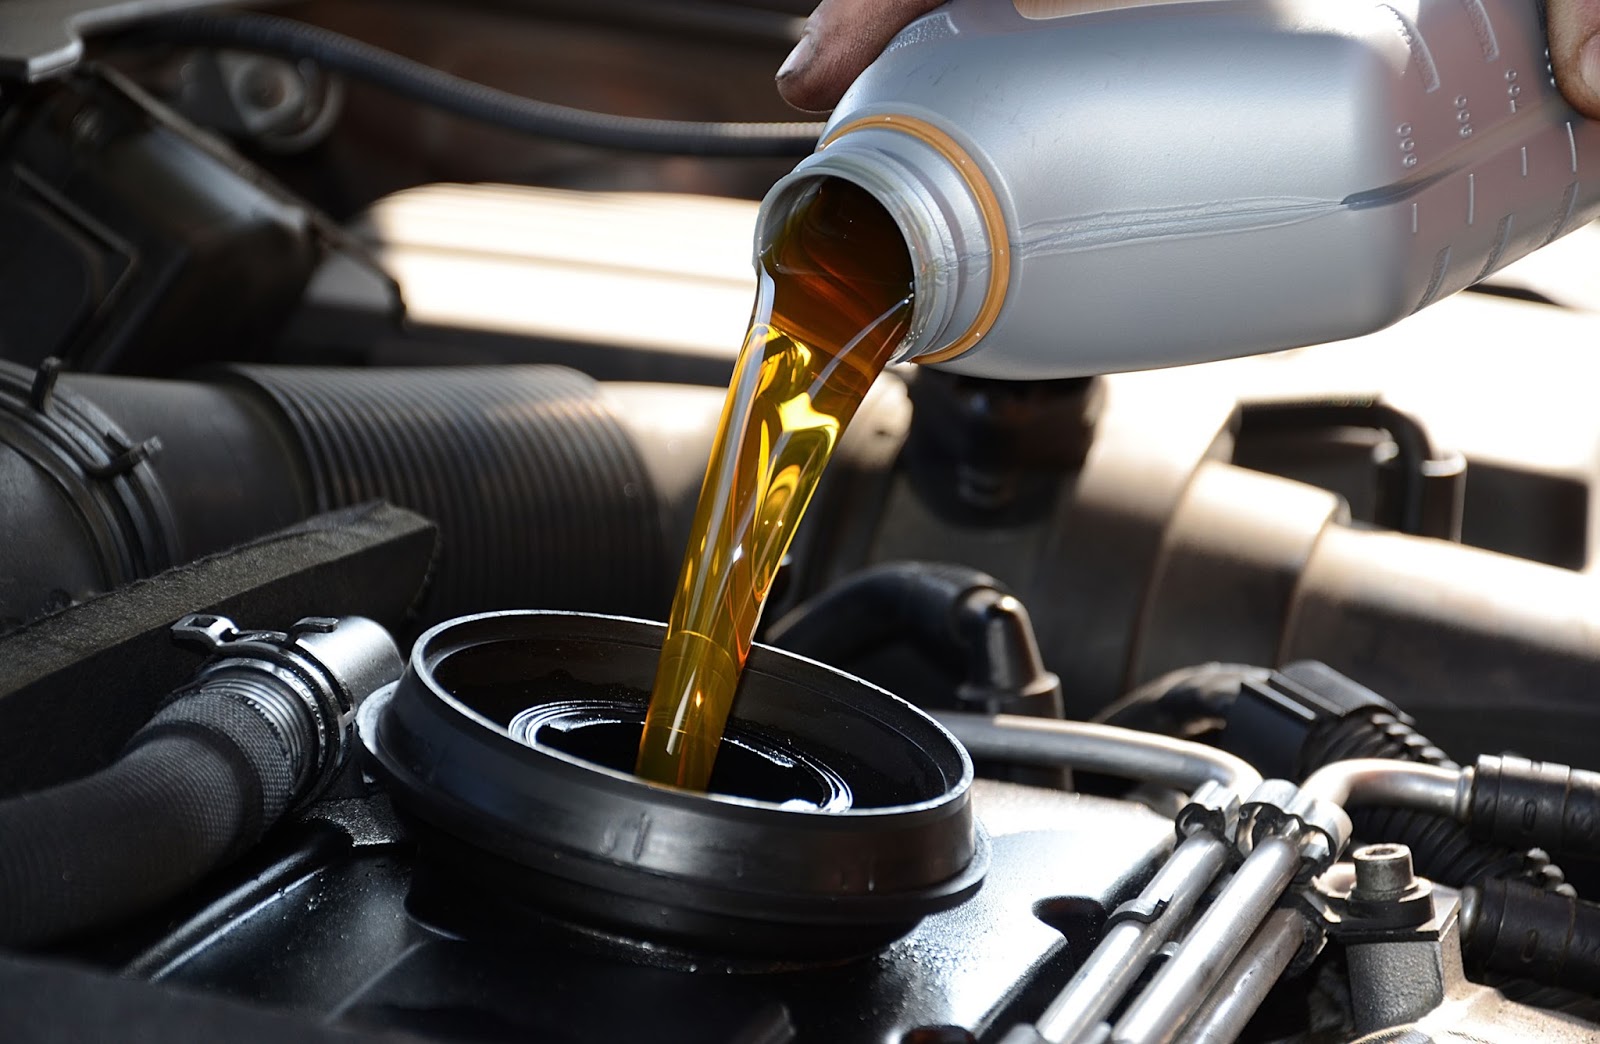 Why is oil important for a car engine?